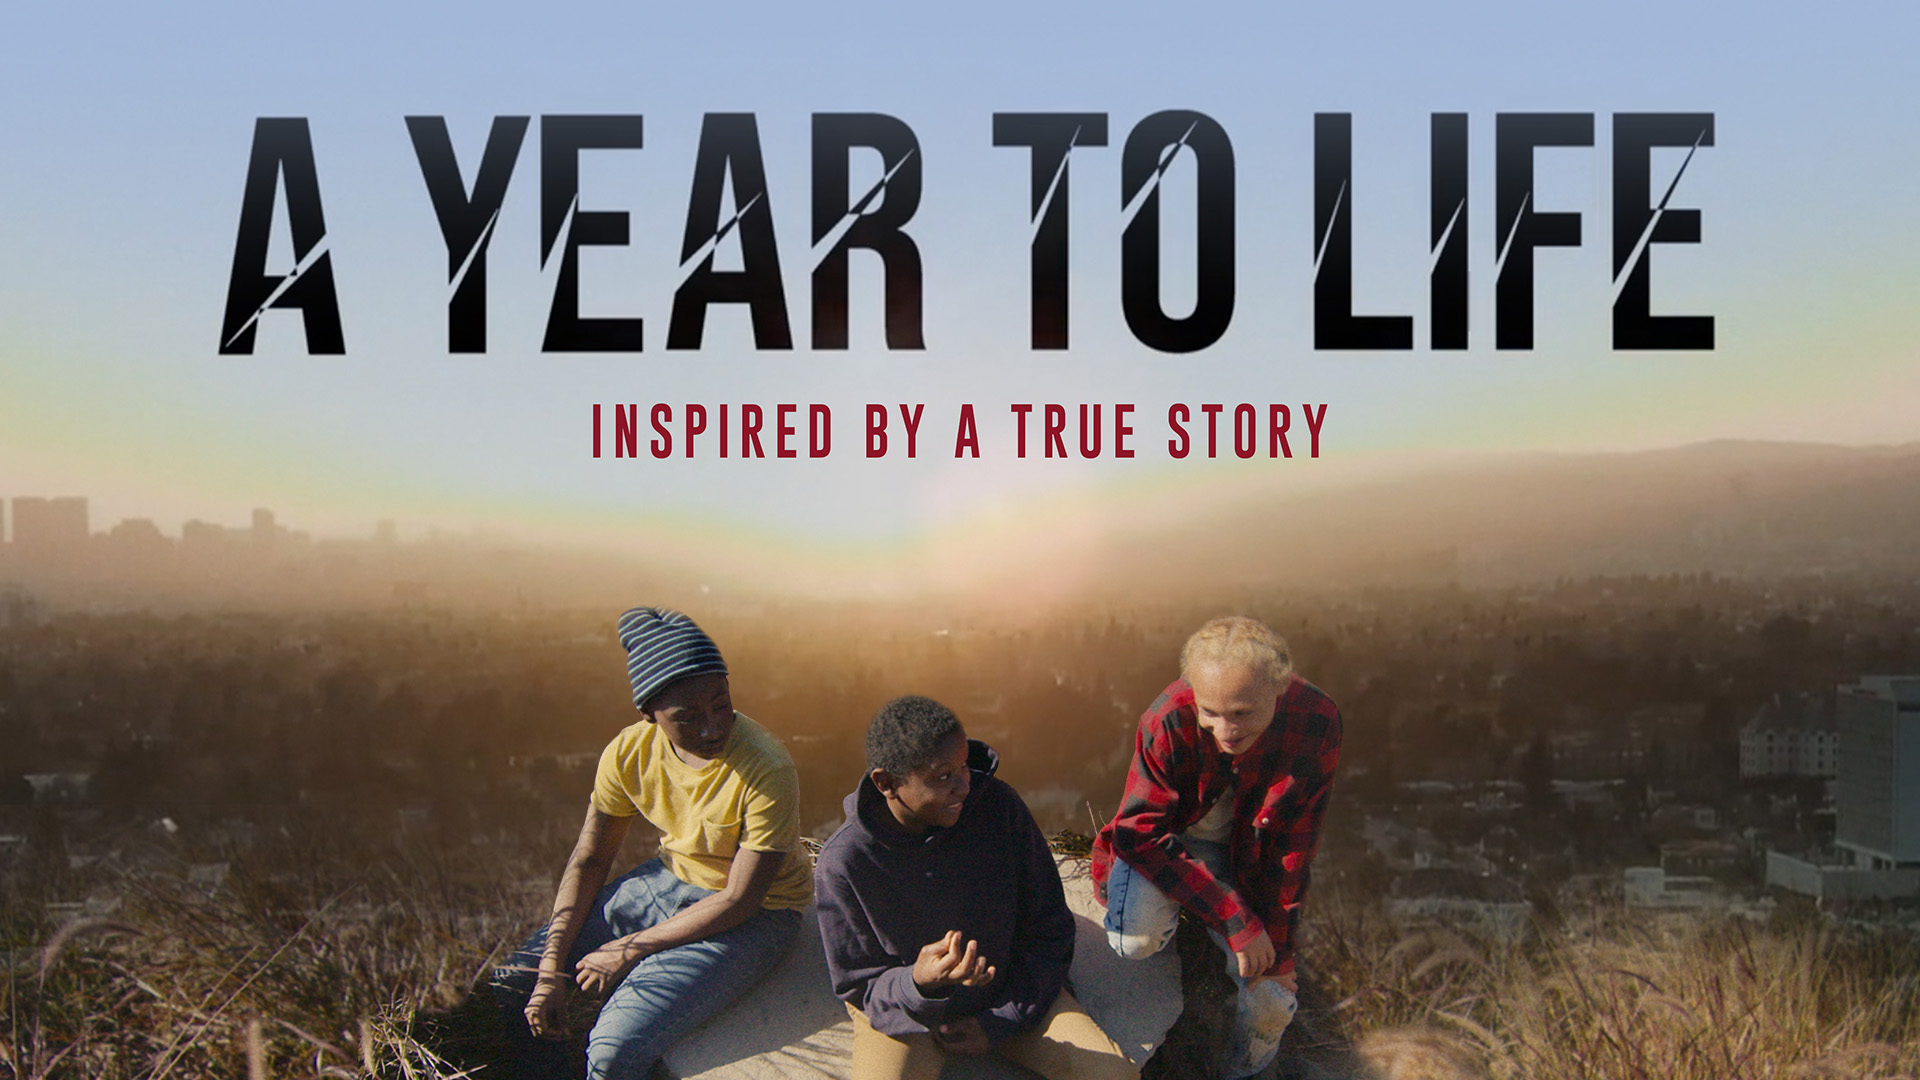 A Year to Life is based on a true story. A Life-altering choice is made for a pre-teen boy on the anniversary of his mother's death.